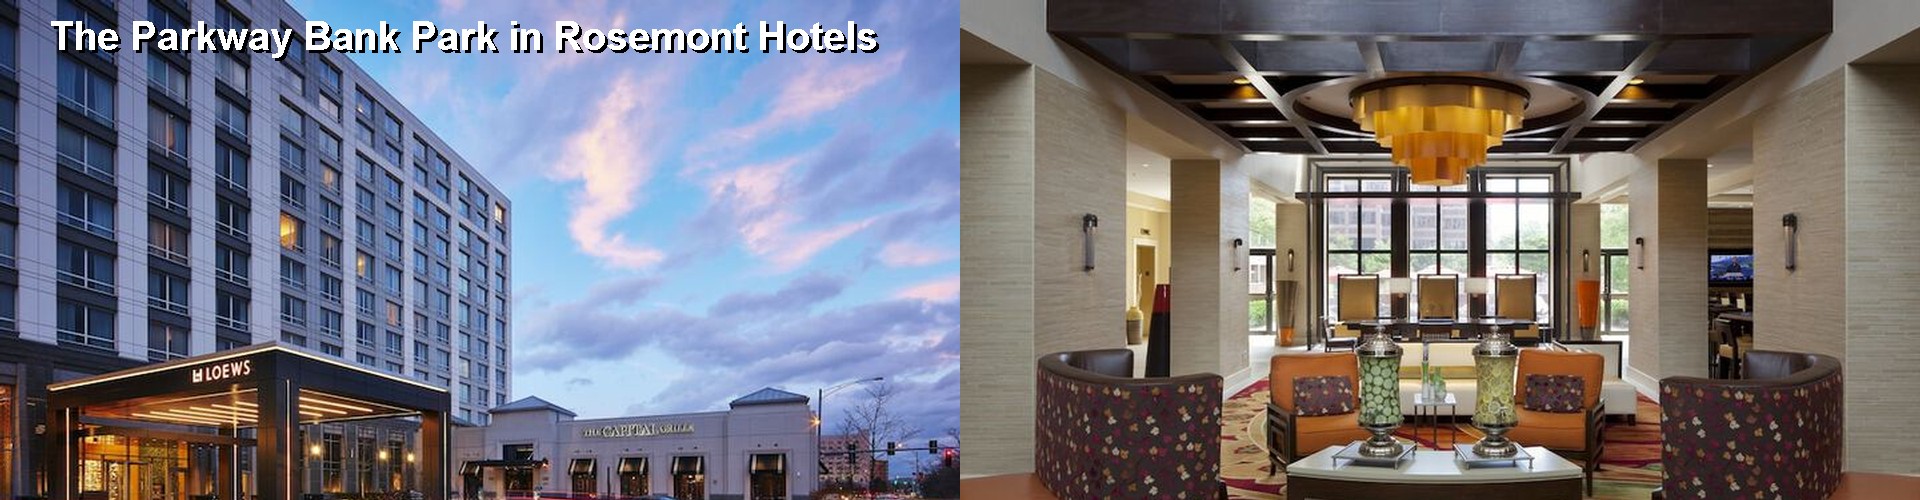 5 Best Hotels near The Parkway Bank Park in Rosemont